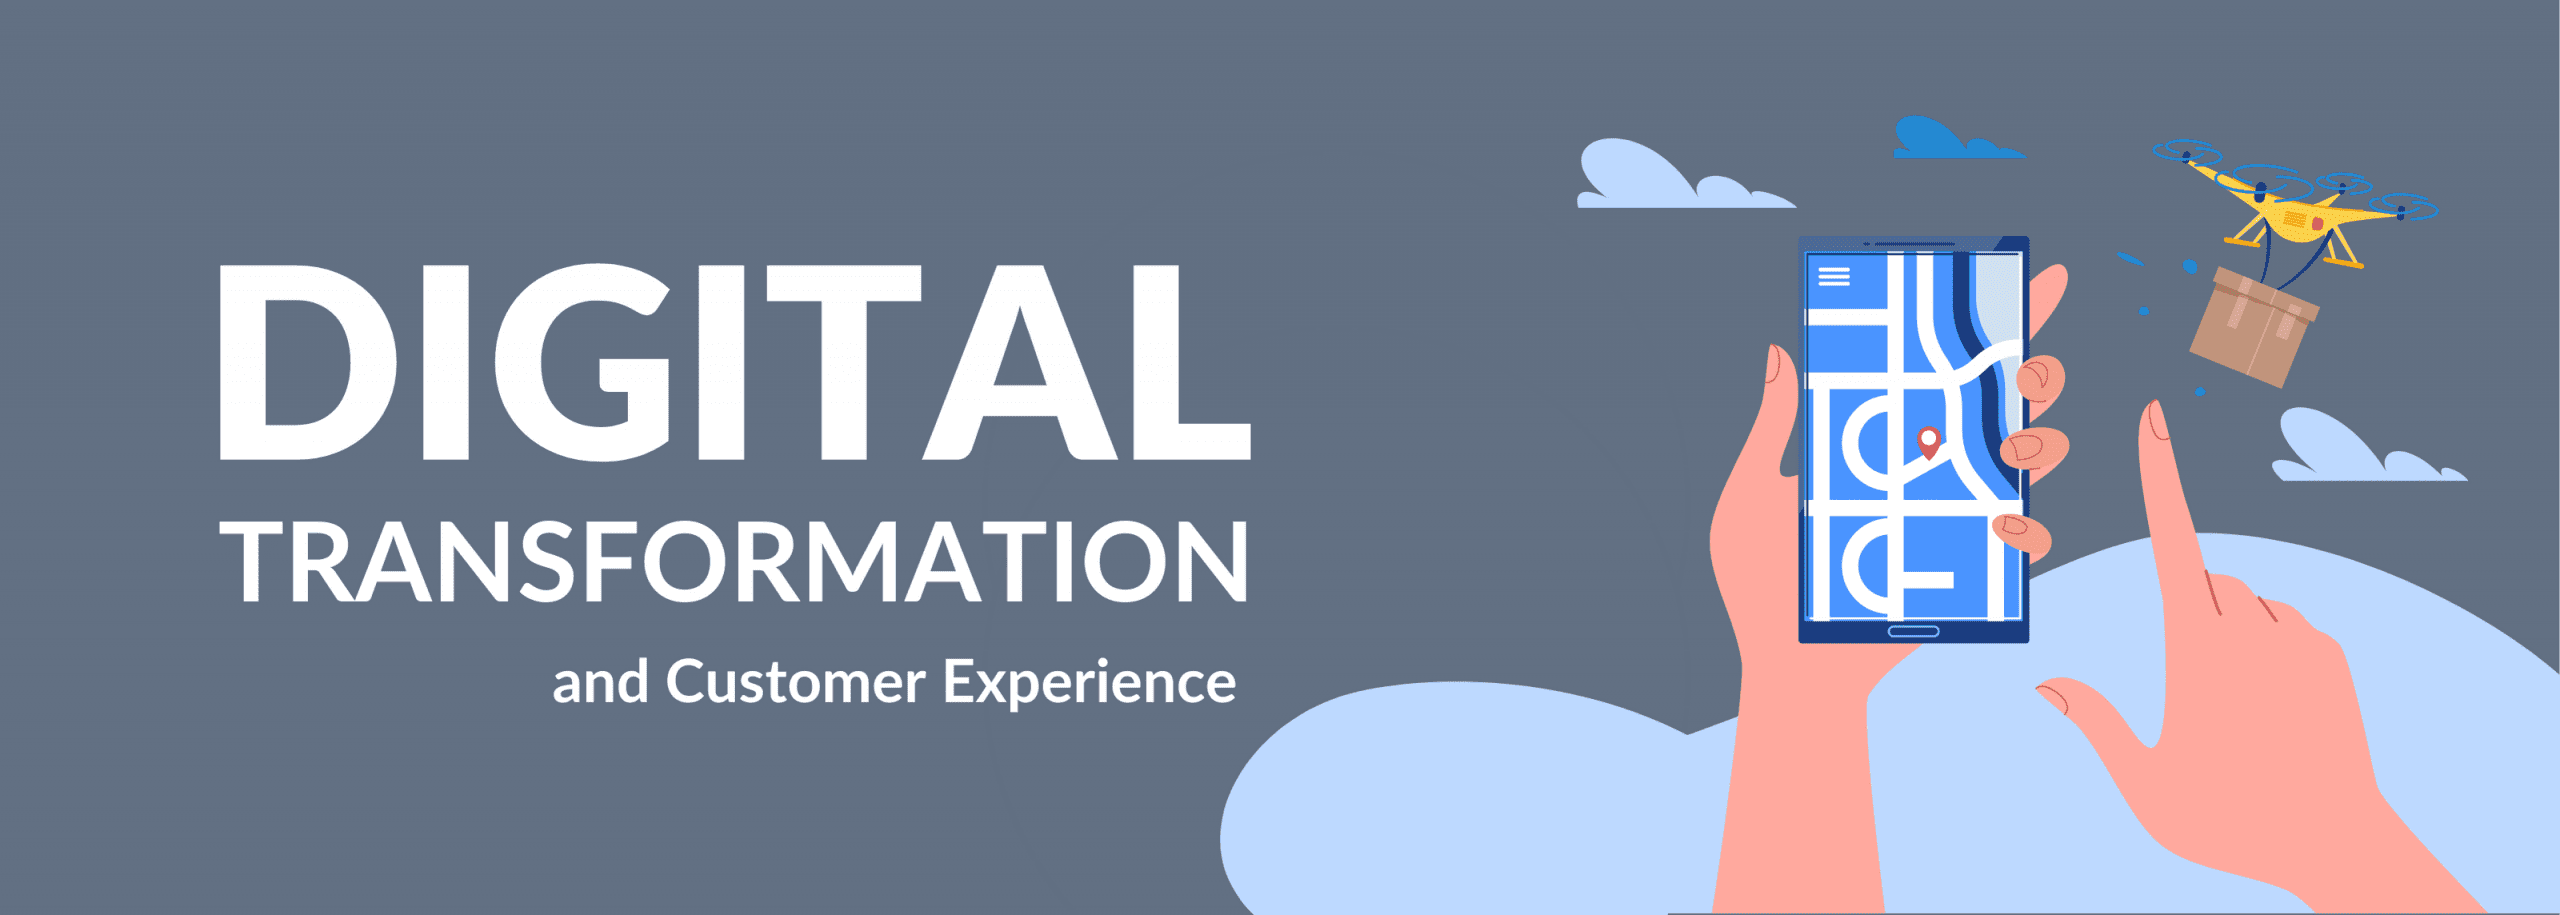 Digital Transformation and Customer Experience